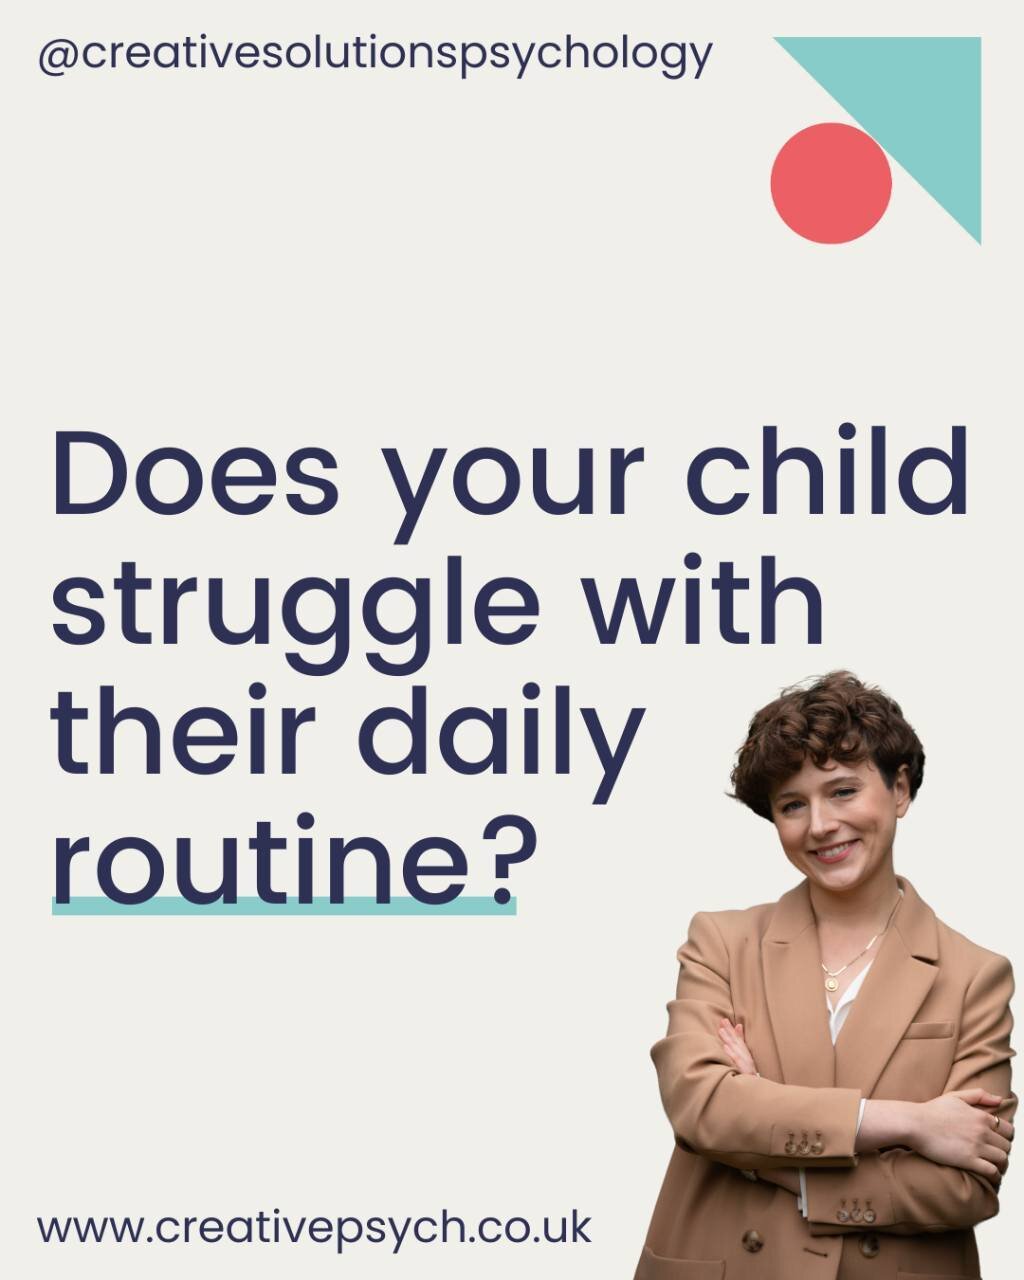 Creating an environment that supports the child's efforts to engage with their routines can make a significant difference. 

This might involve setting clear, achievable expectations, using positive reinforcement to encourage effort and progress, and